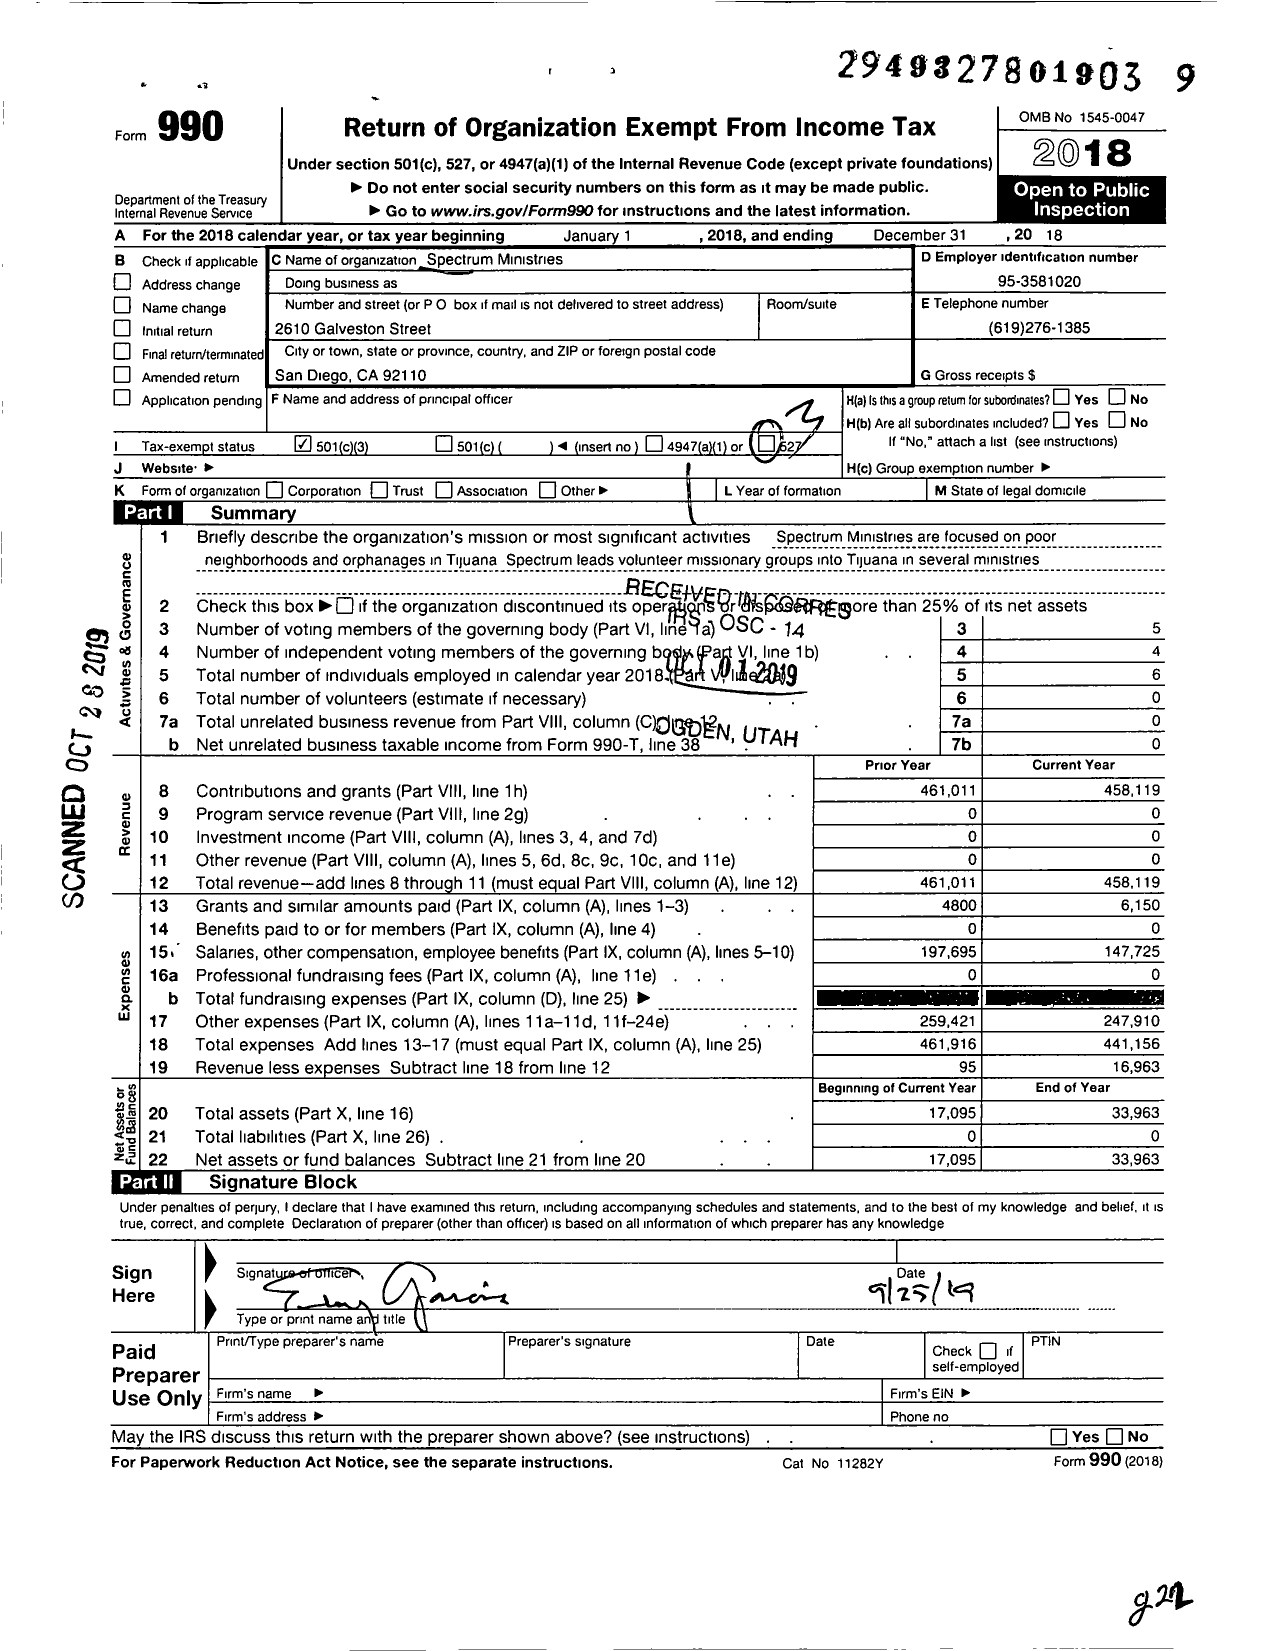 Image of first page of 2018 Form 990 for Spectrum Ministries